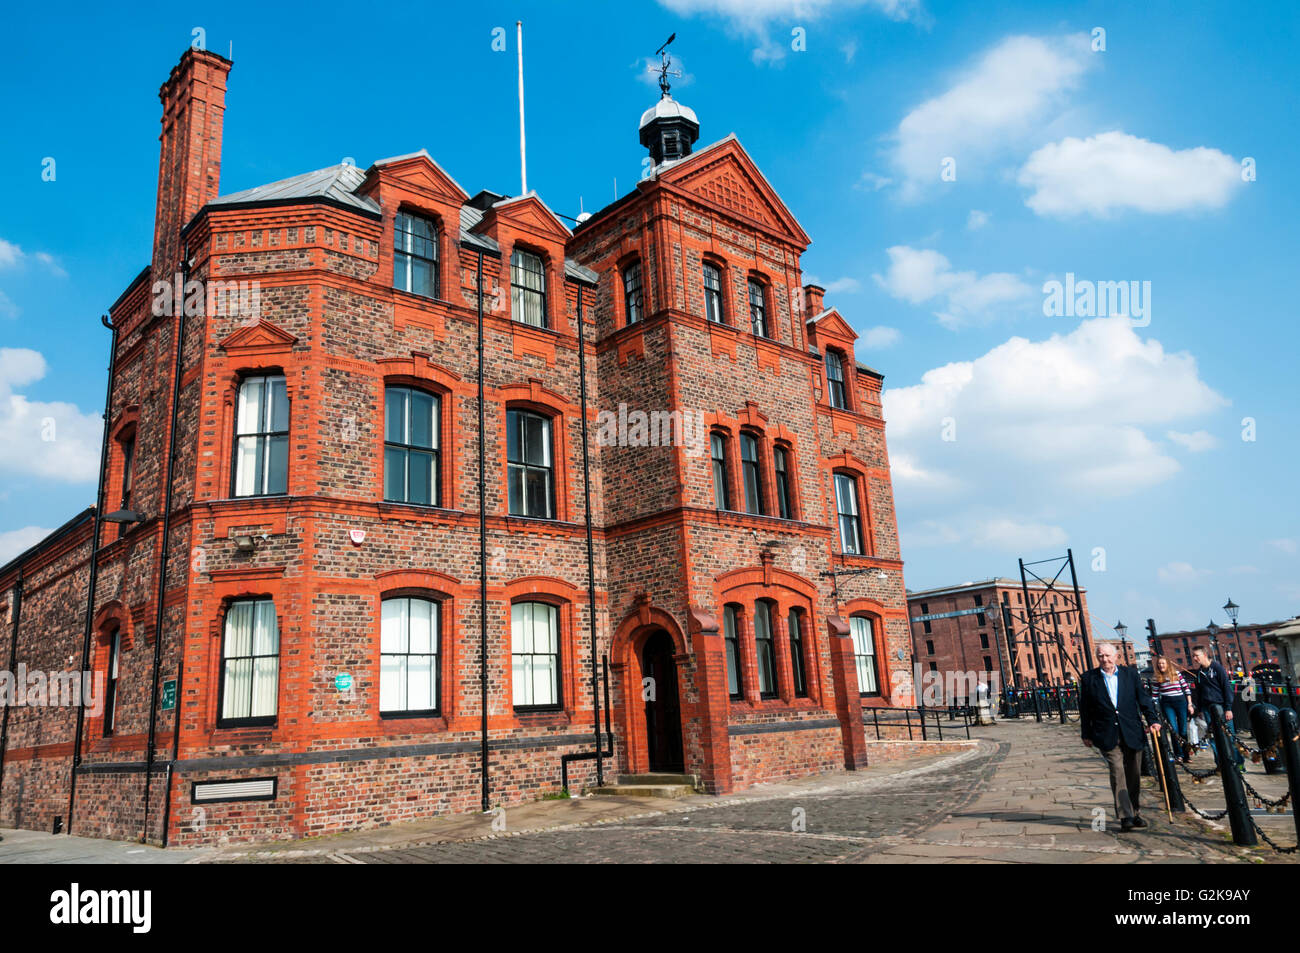 The Liverpool Pilot Office 1883-1978 from where pilots would guide ships on the Mersey.  Now part of National Museums Liverpool. Stock Photo